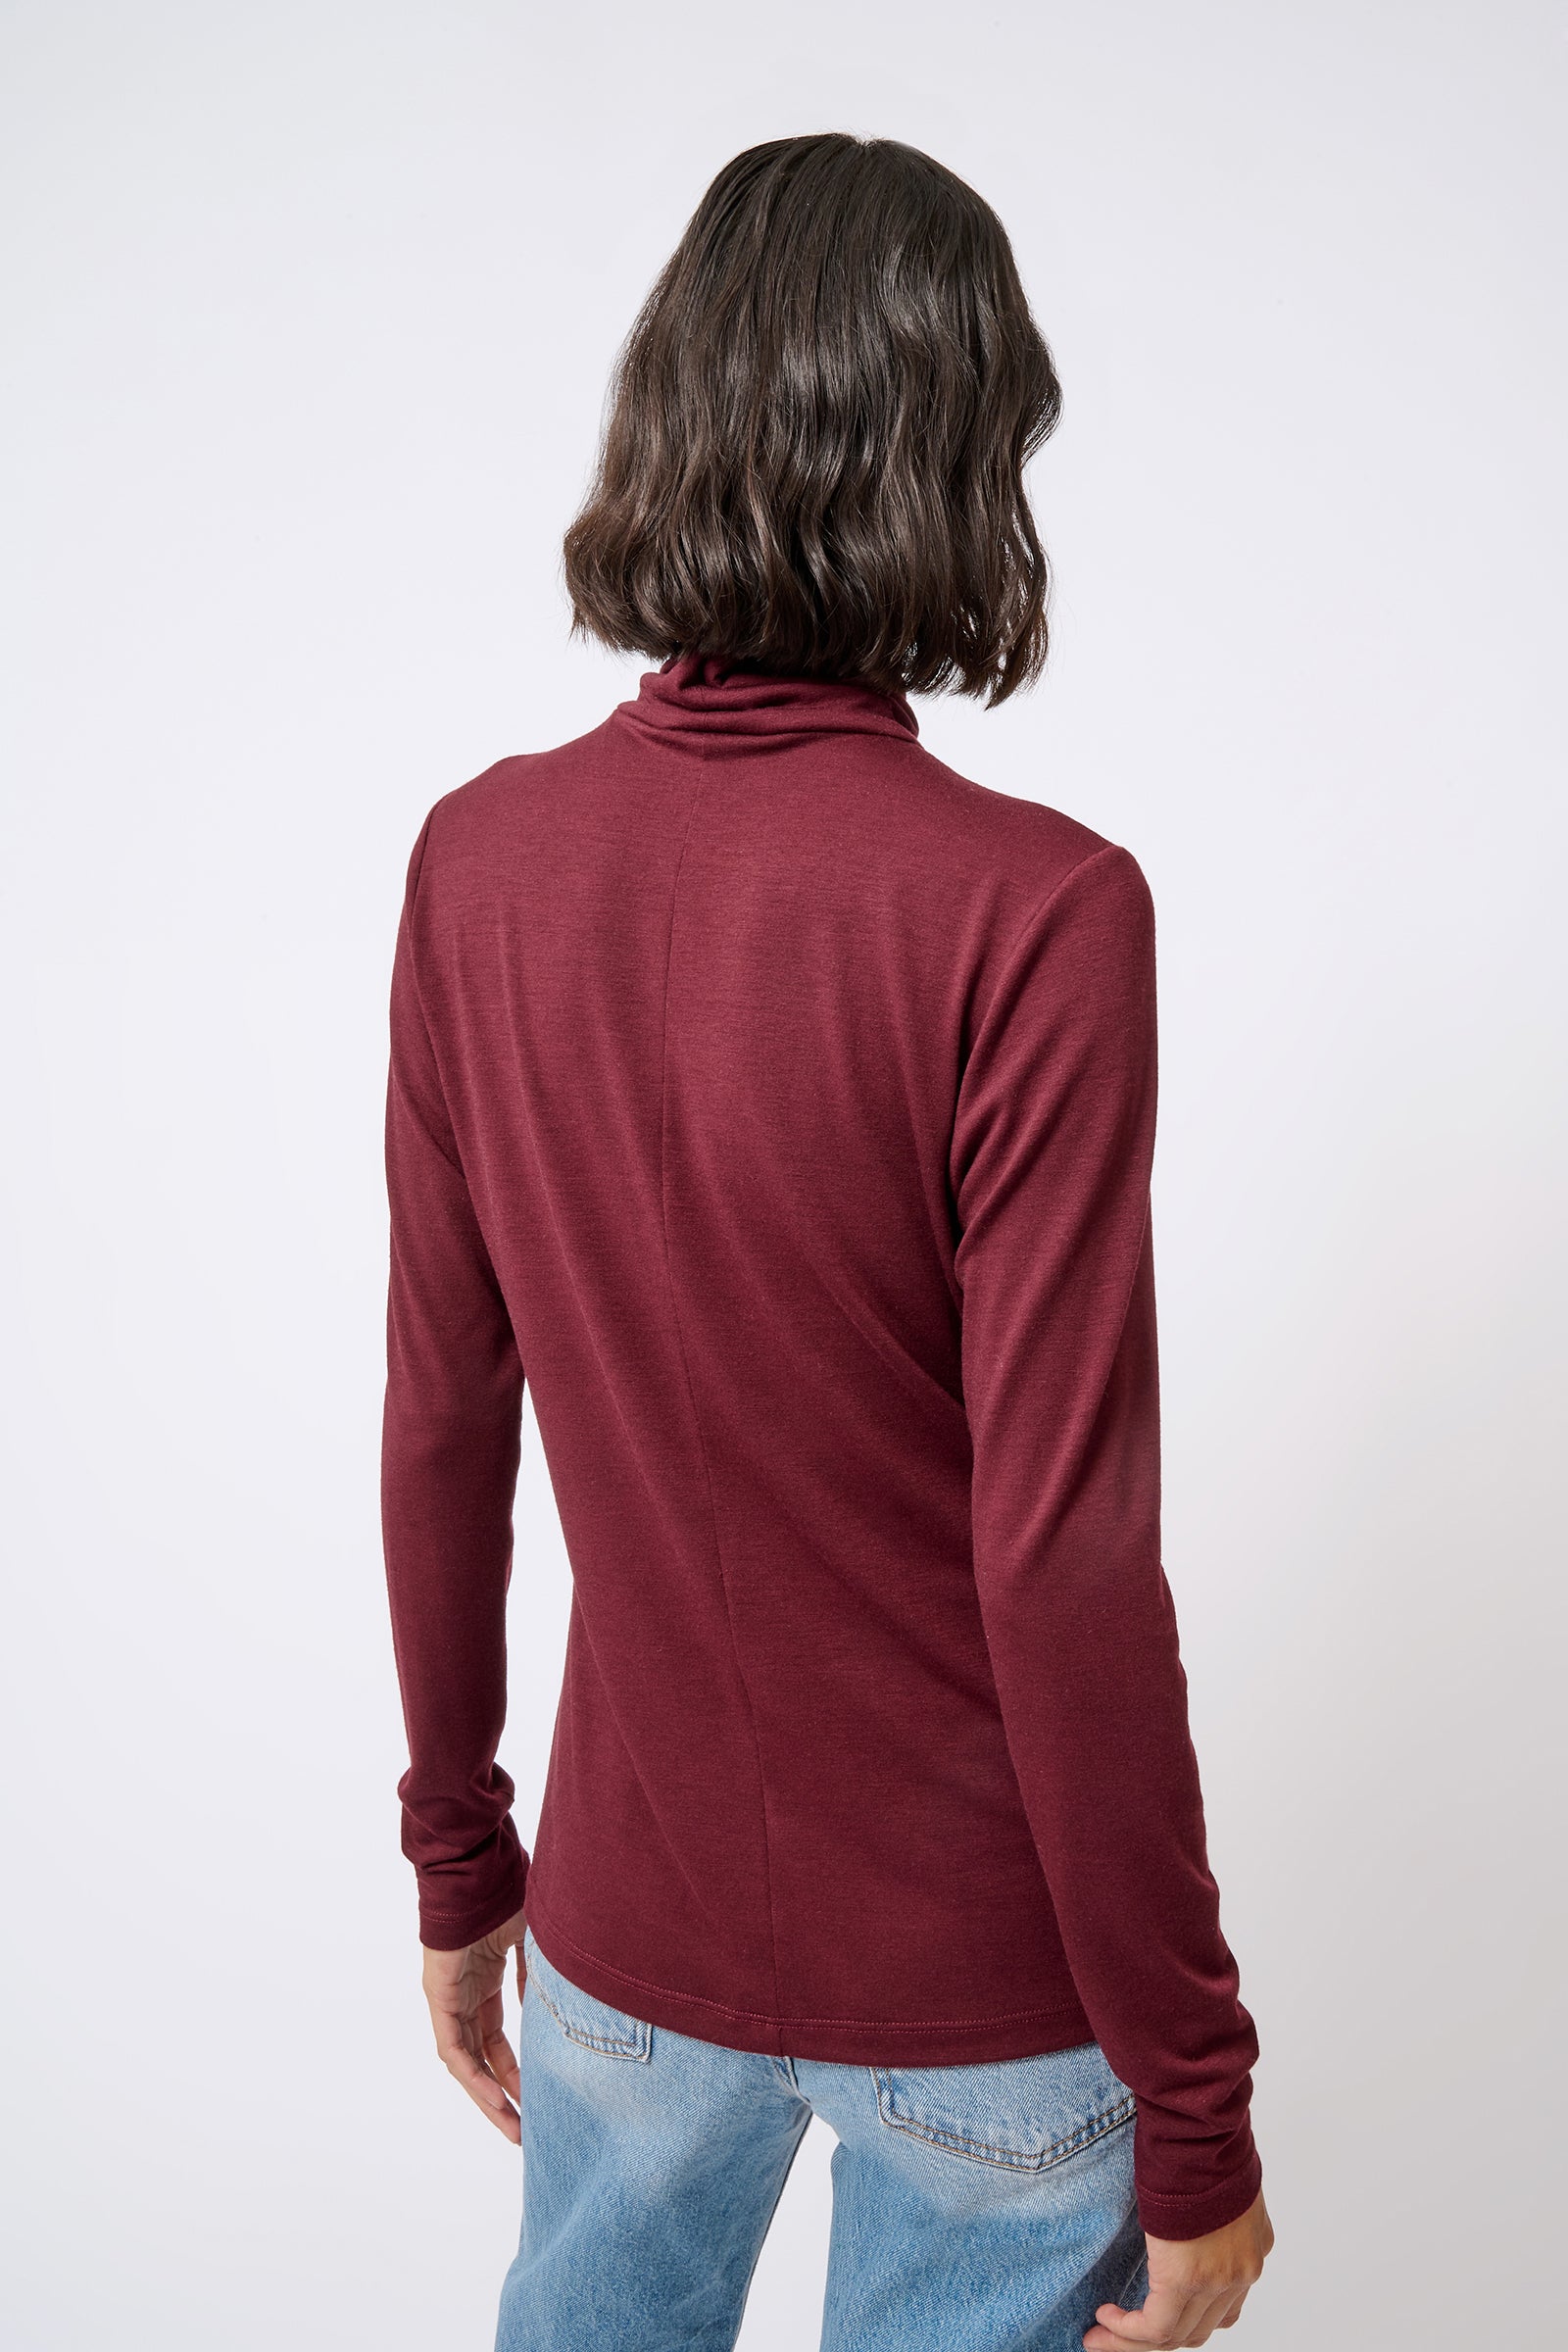 Kal Rieman Seamed Fitted Turtleneck in Wine Color on Model Front View